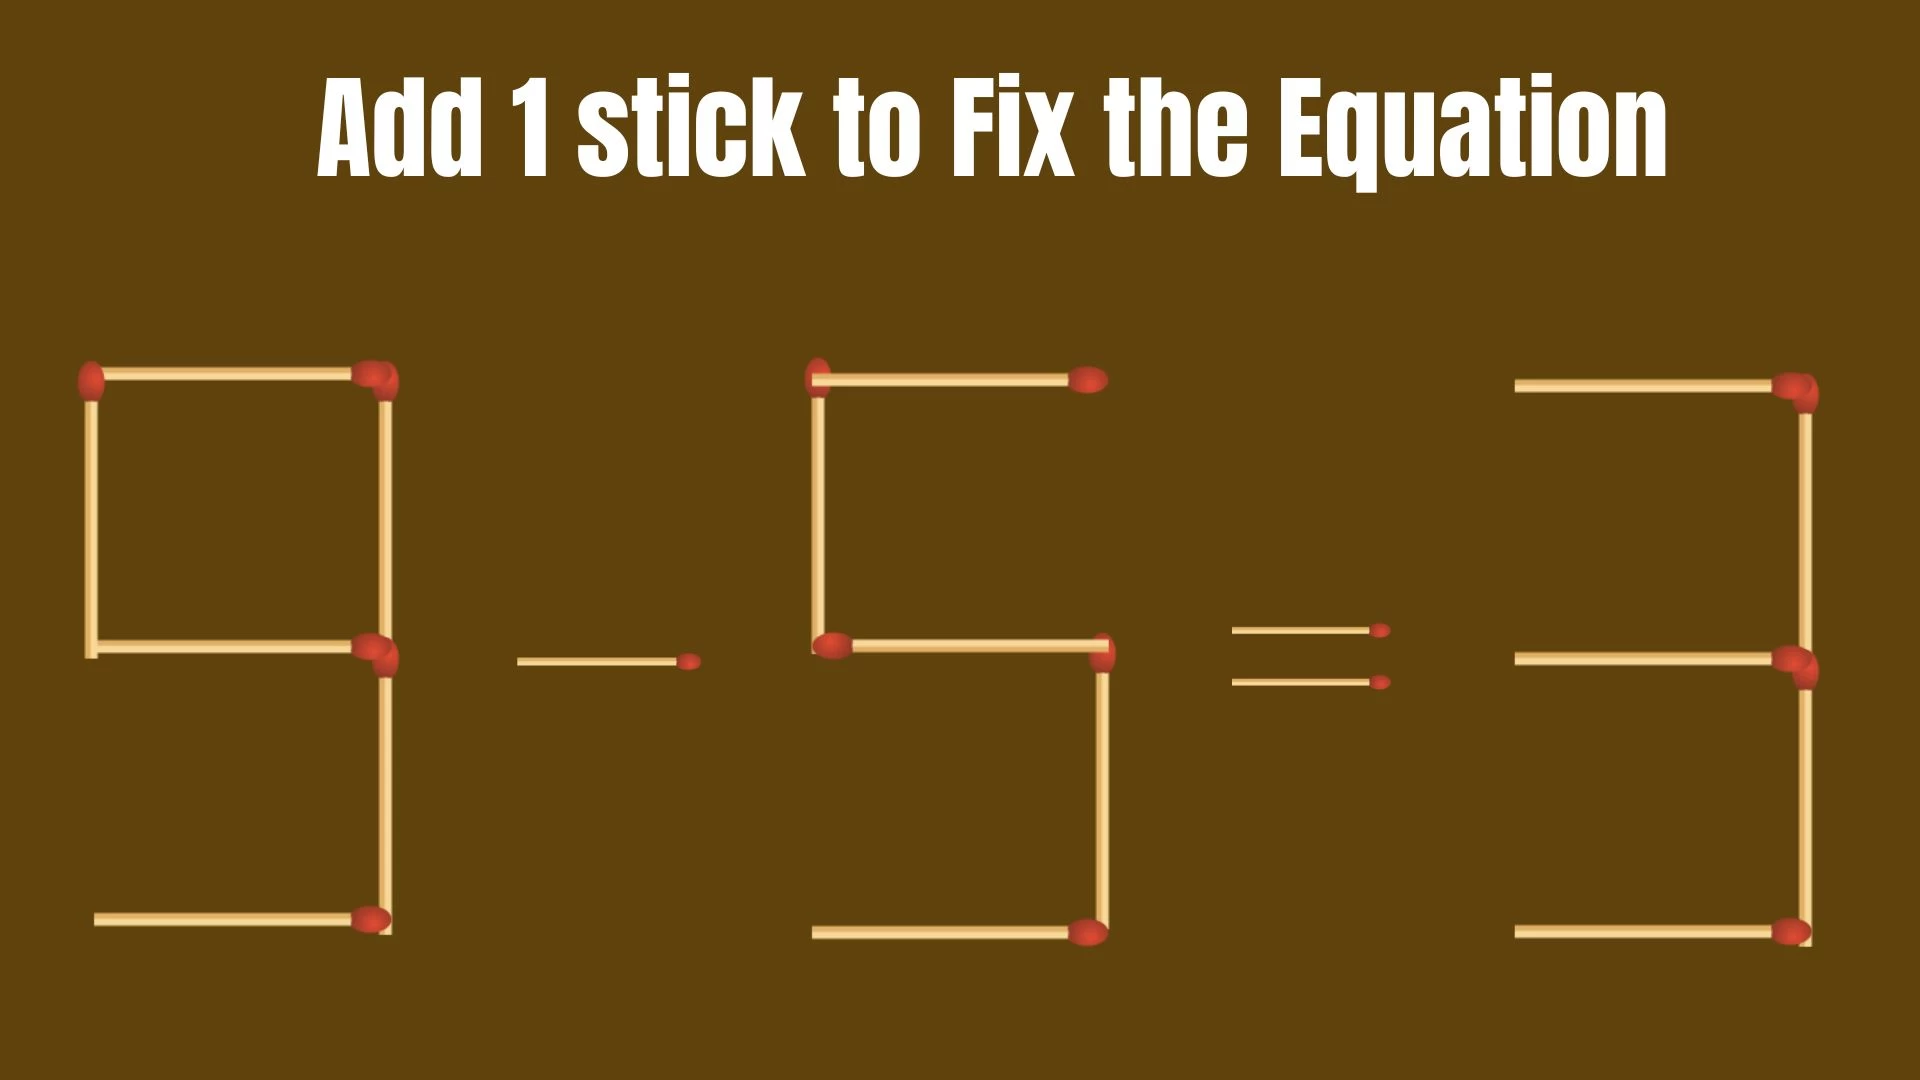 Solve the Puzzle to Transform 9-5=3 by Adding 1 Matchstick to Correct the Equation